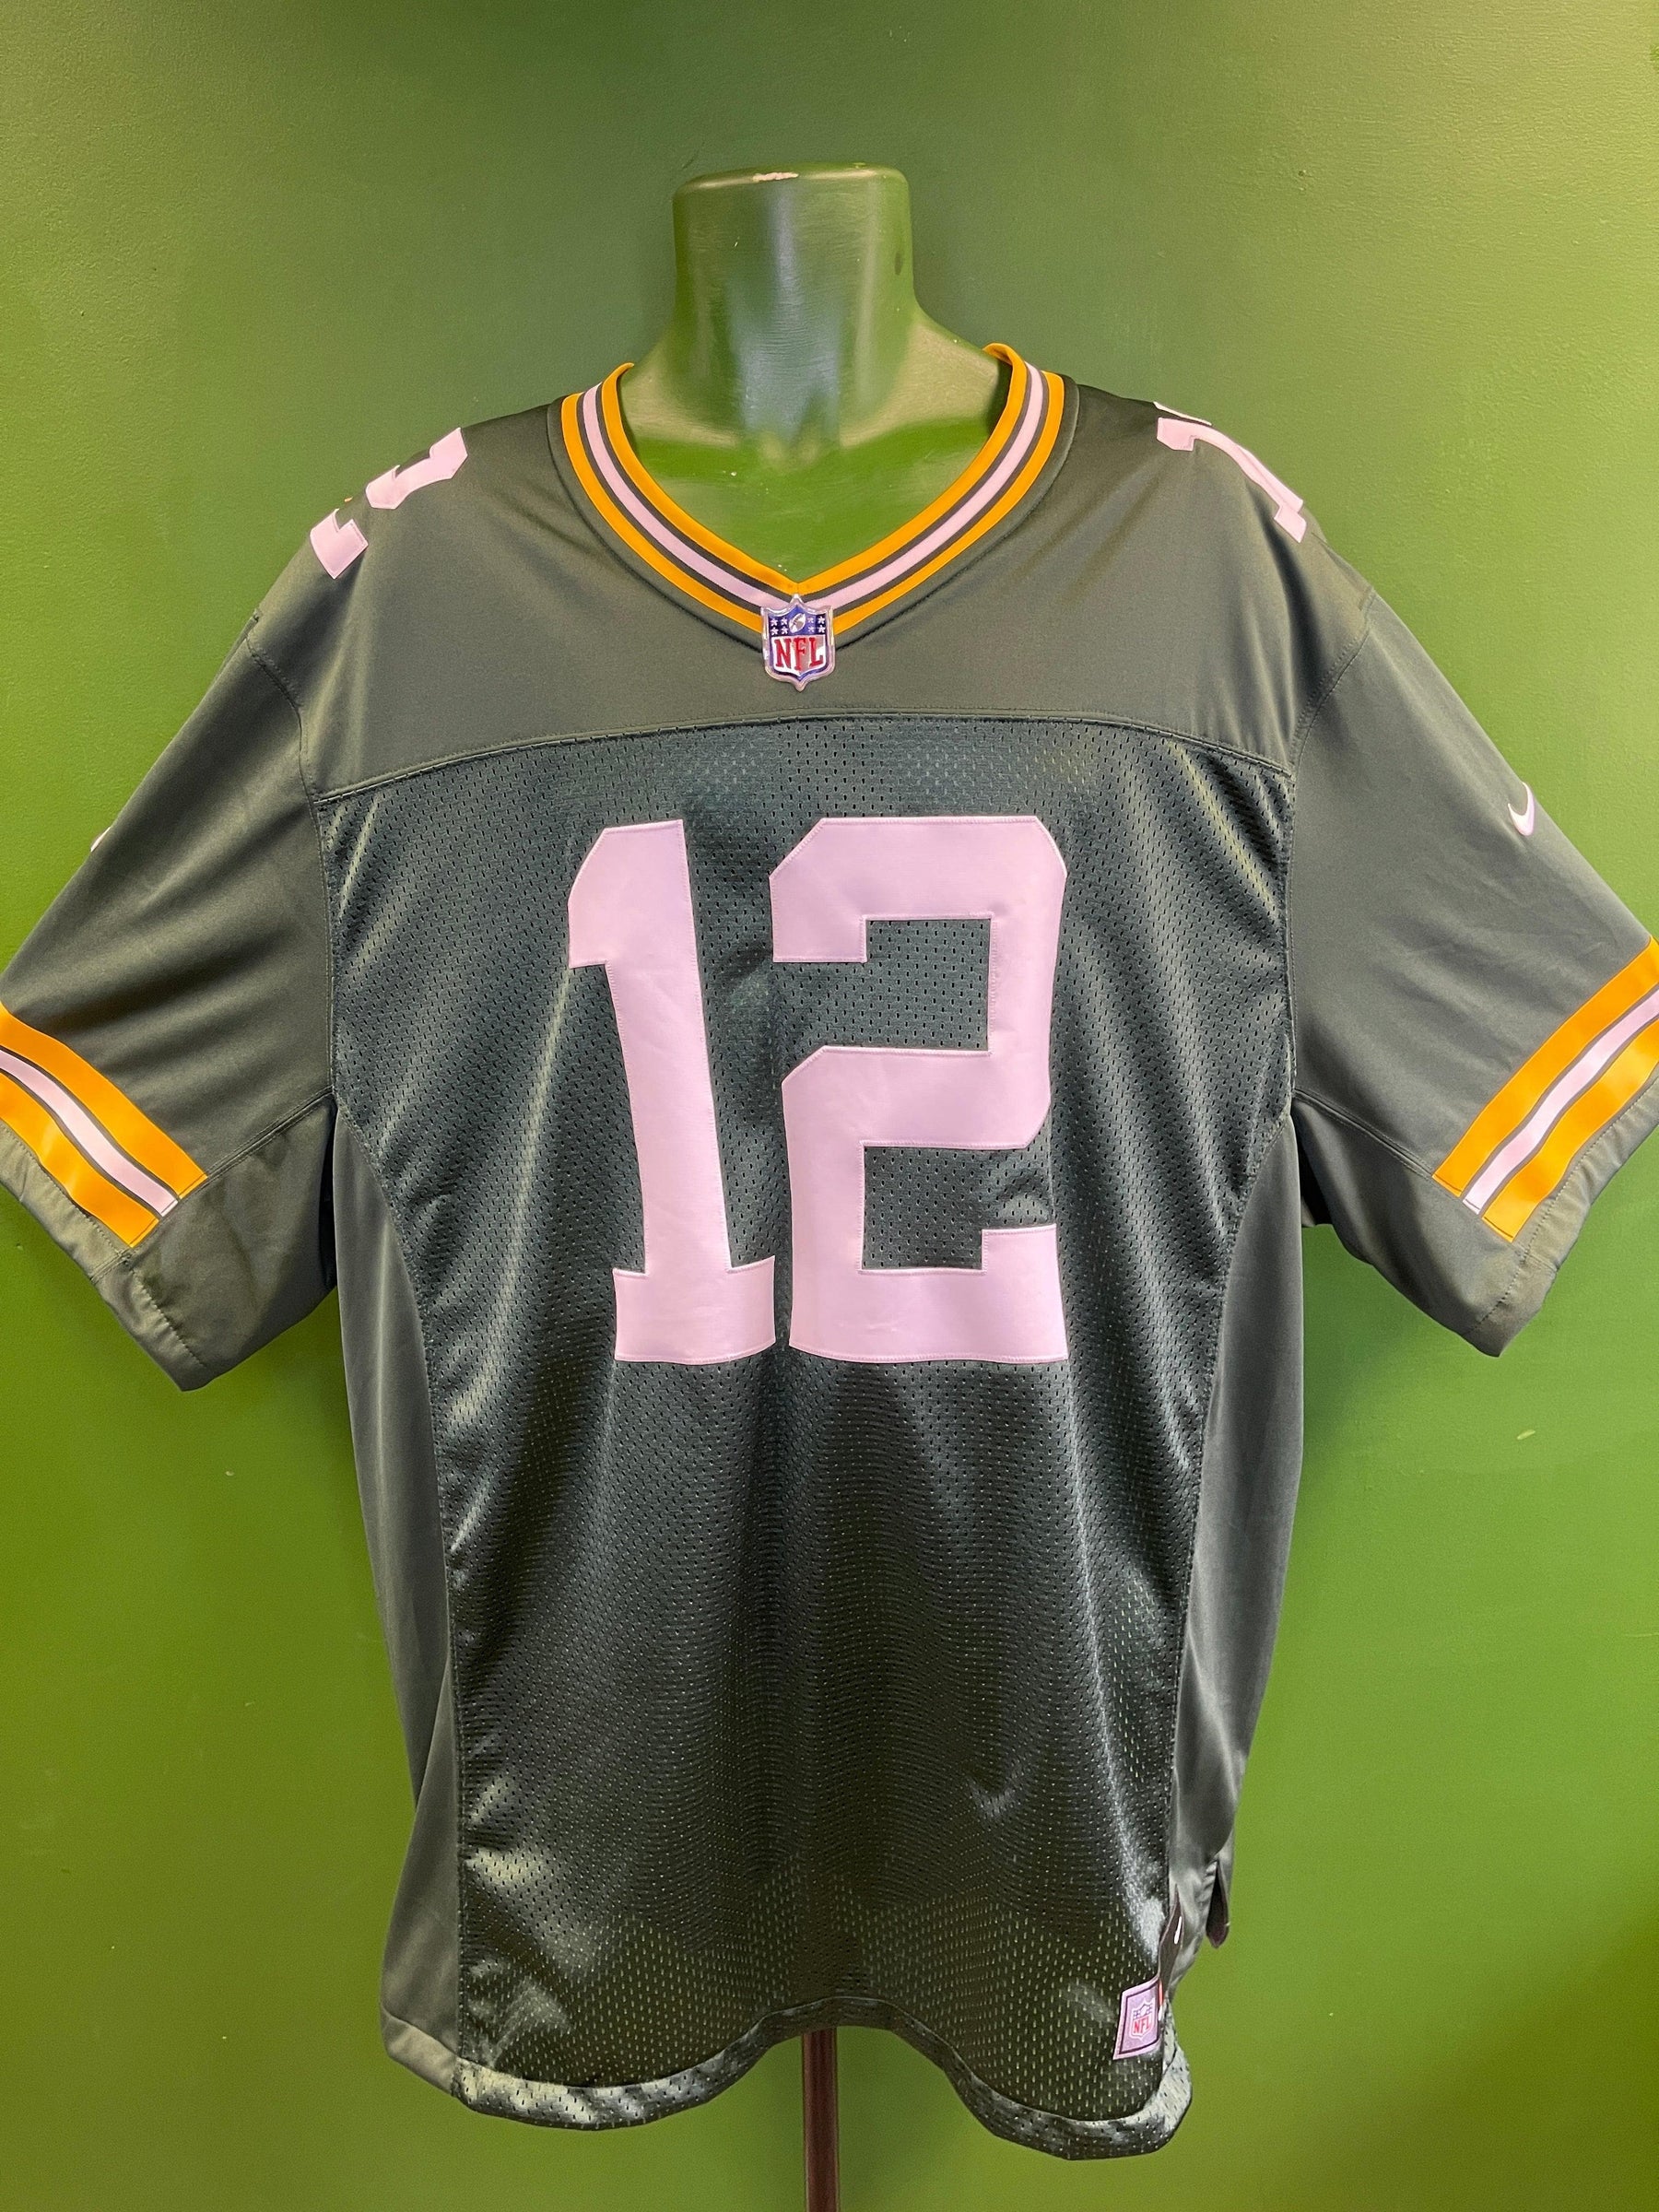 NFL Green Bay Packers Rodgers #12 Limited Stitched Jersey Men's 3X-Large NWT